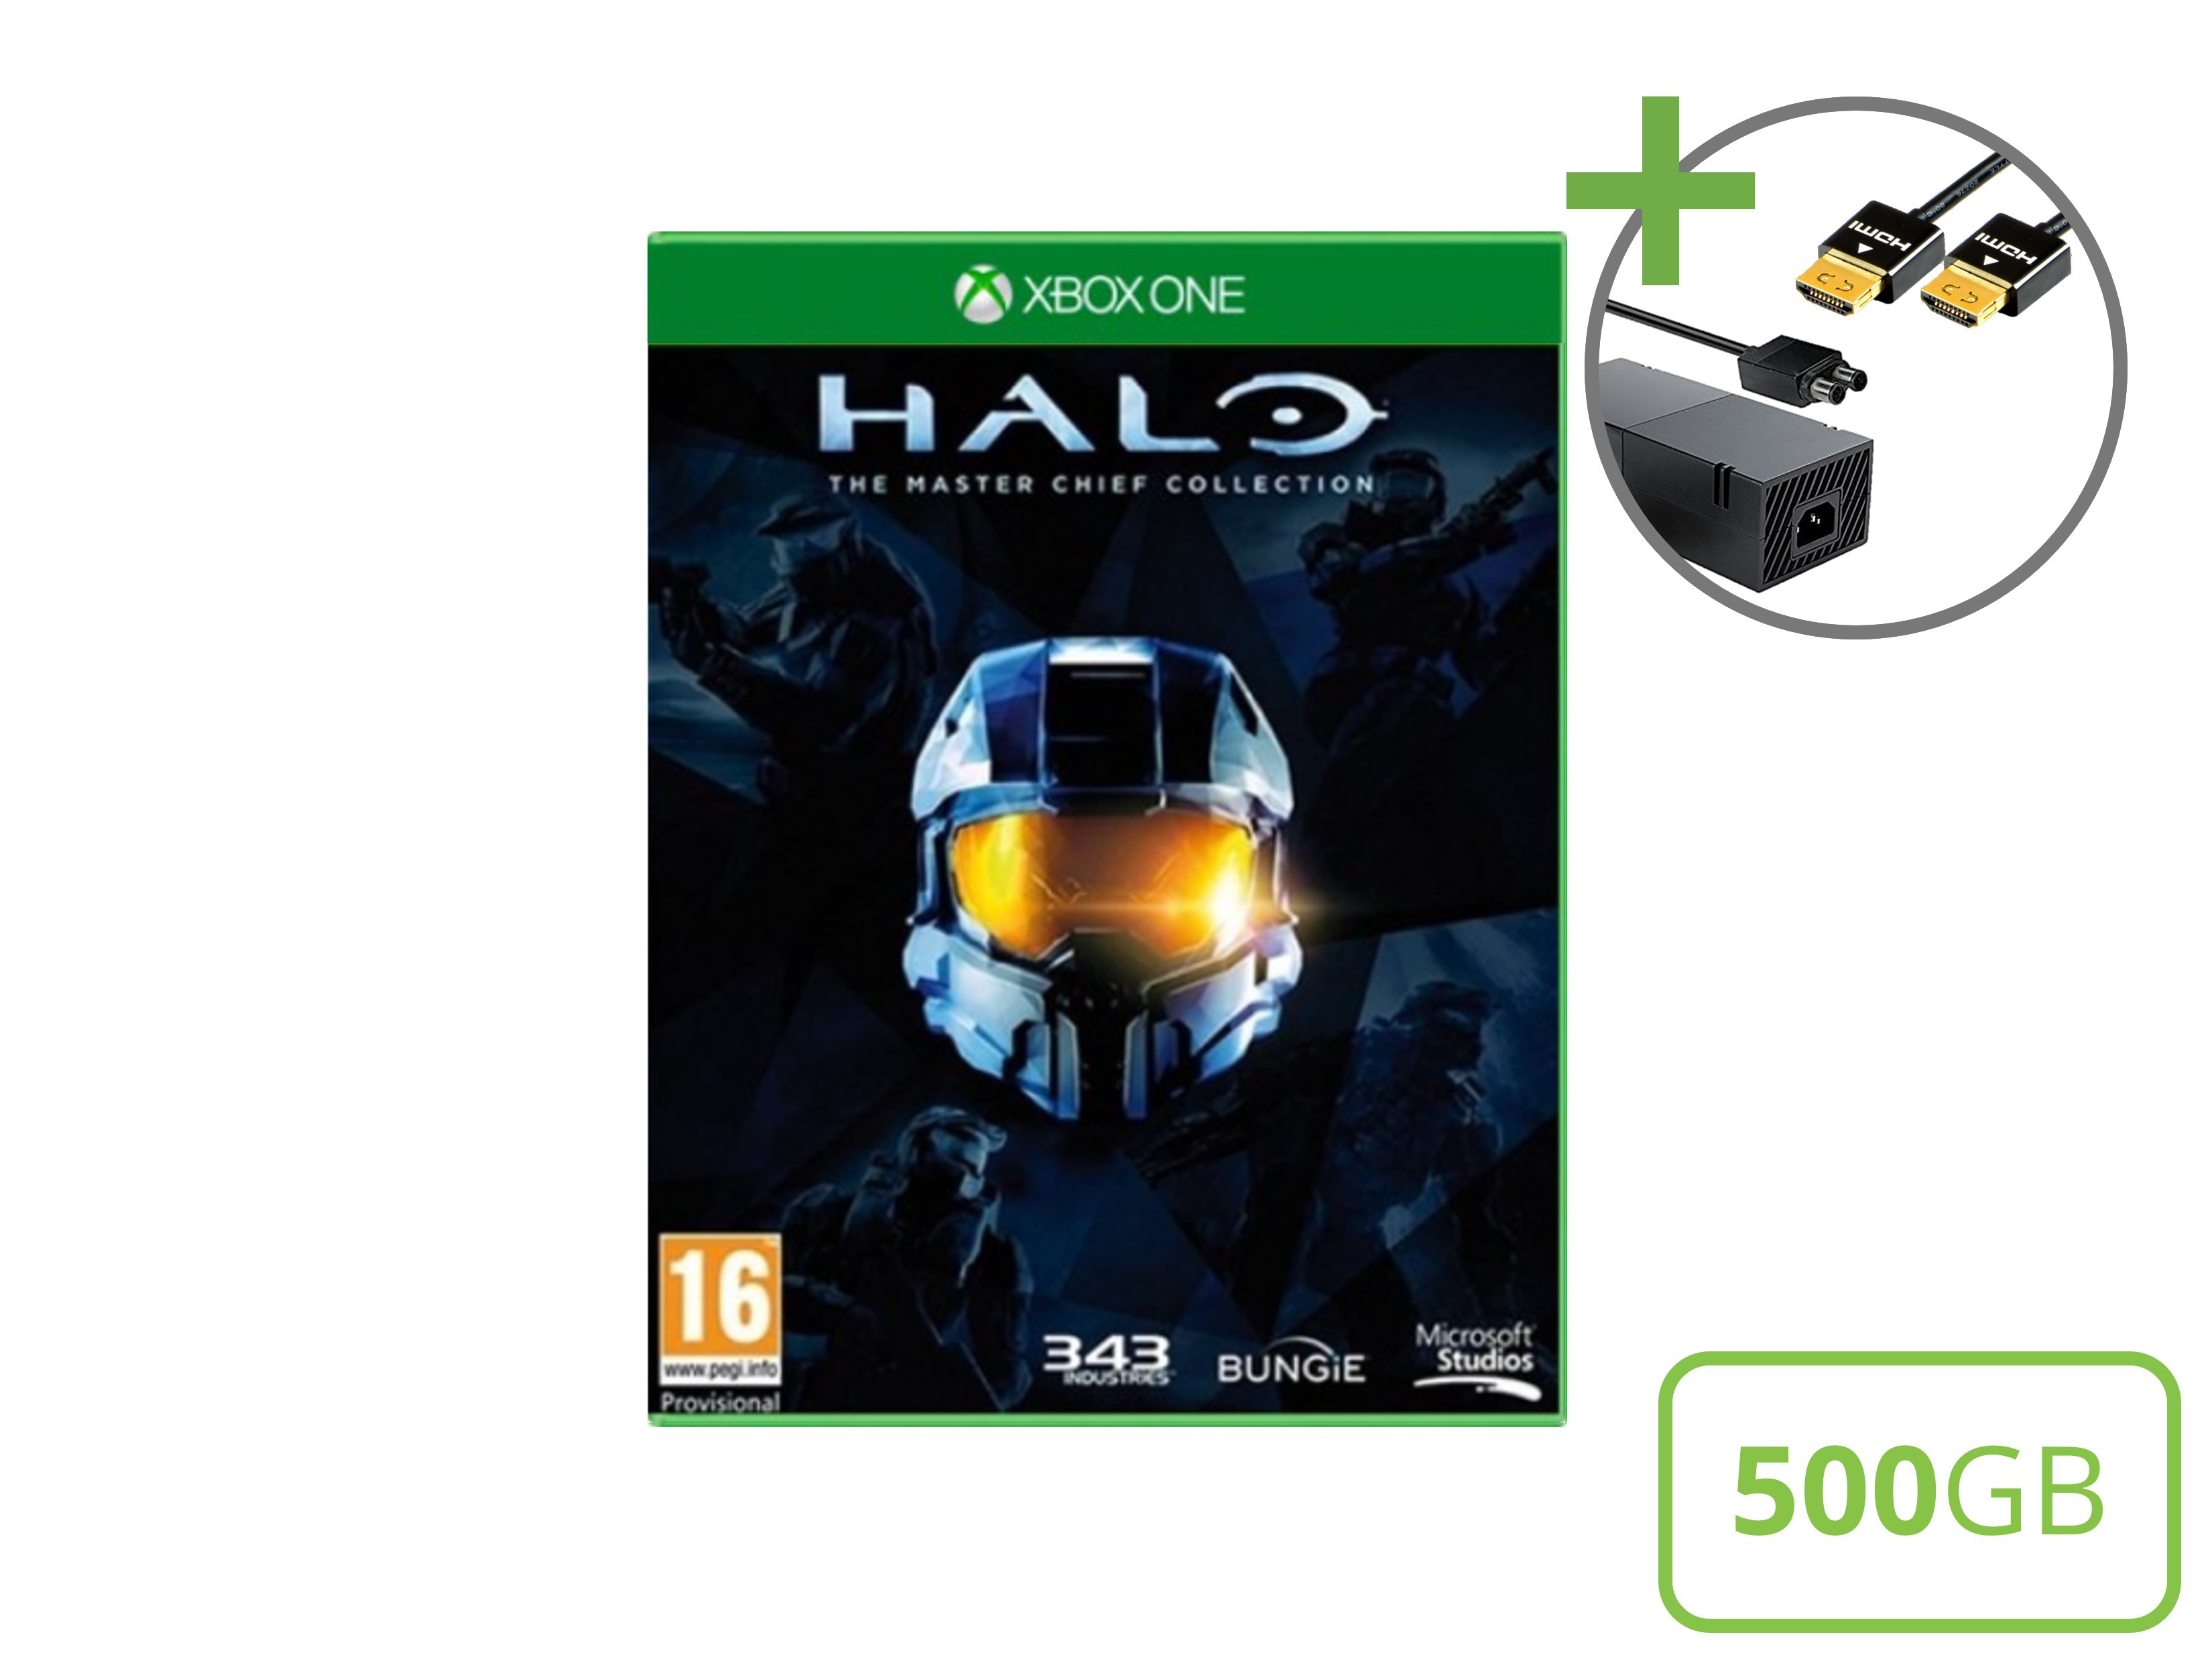 Microsoft Xbox One Starter Pack - 500GB Halo The Master Chief Collection Edition - Xbox One Hardware - 4